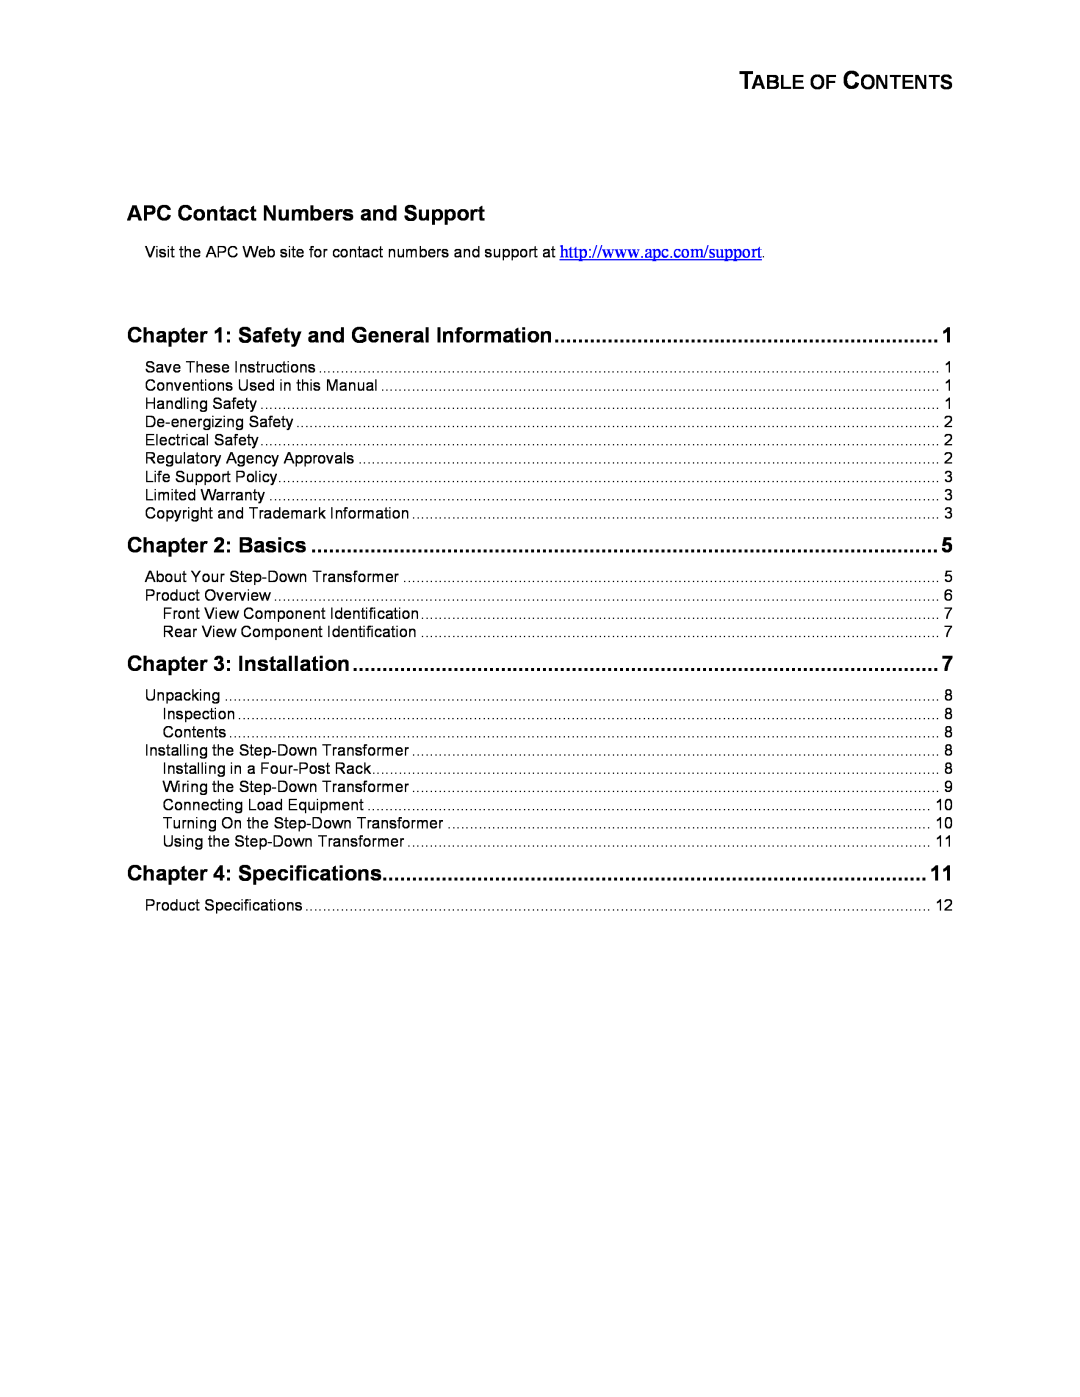 American Power Conversion SYTF2J, SYTF3 Table Of Contents, APC Contact Numbers and Support, Safety and General Information 